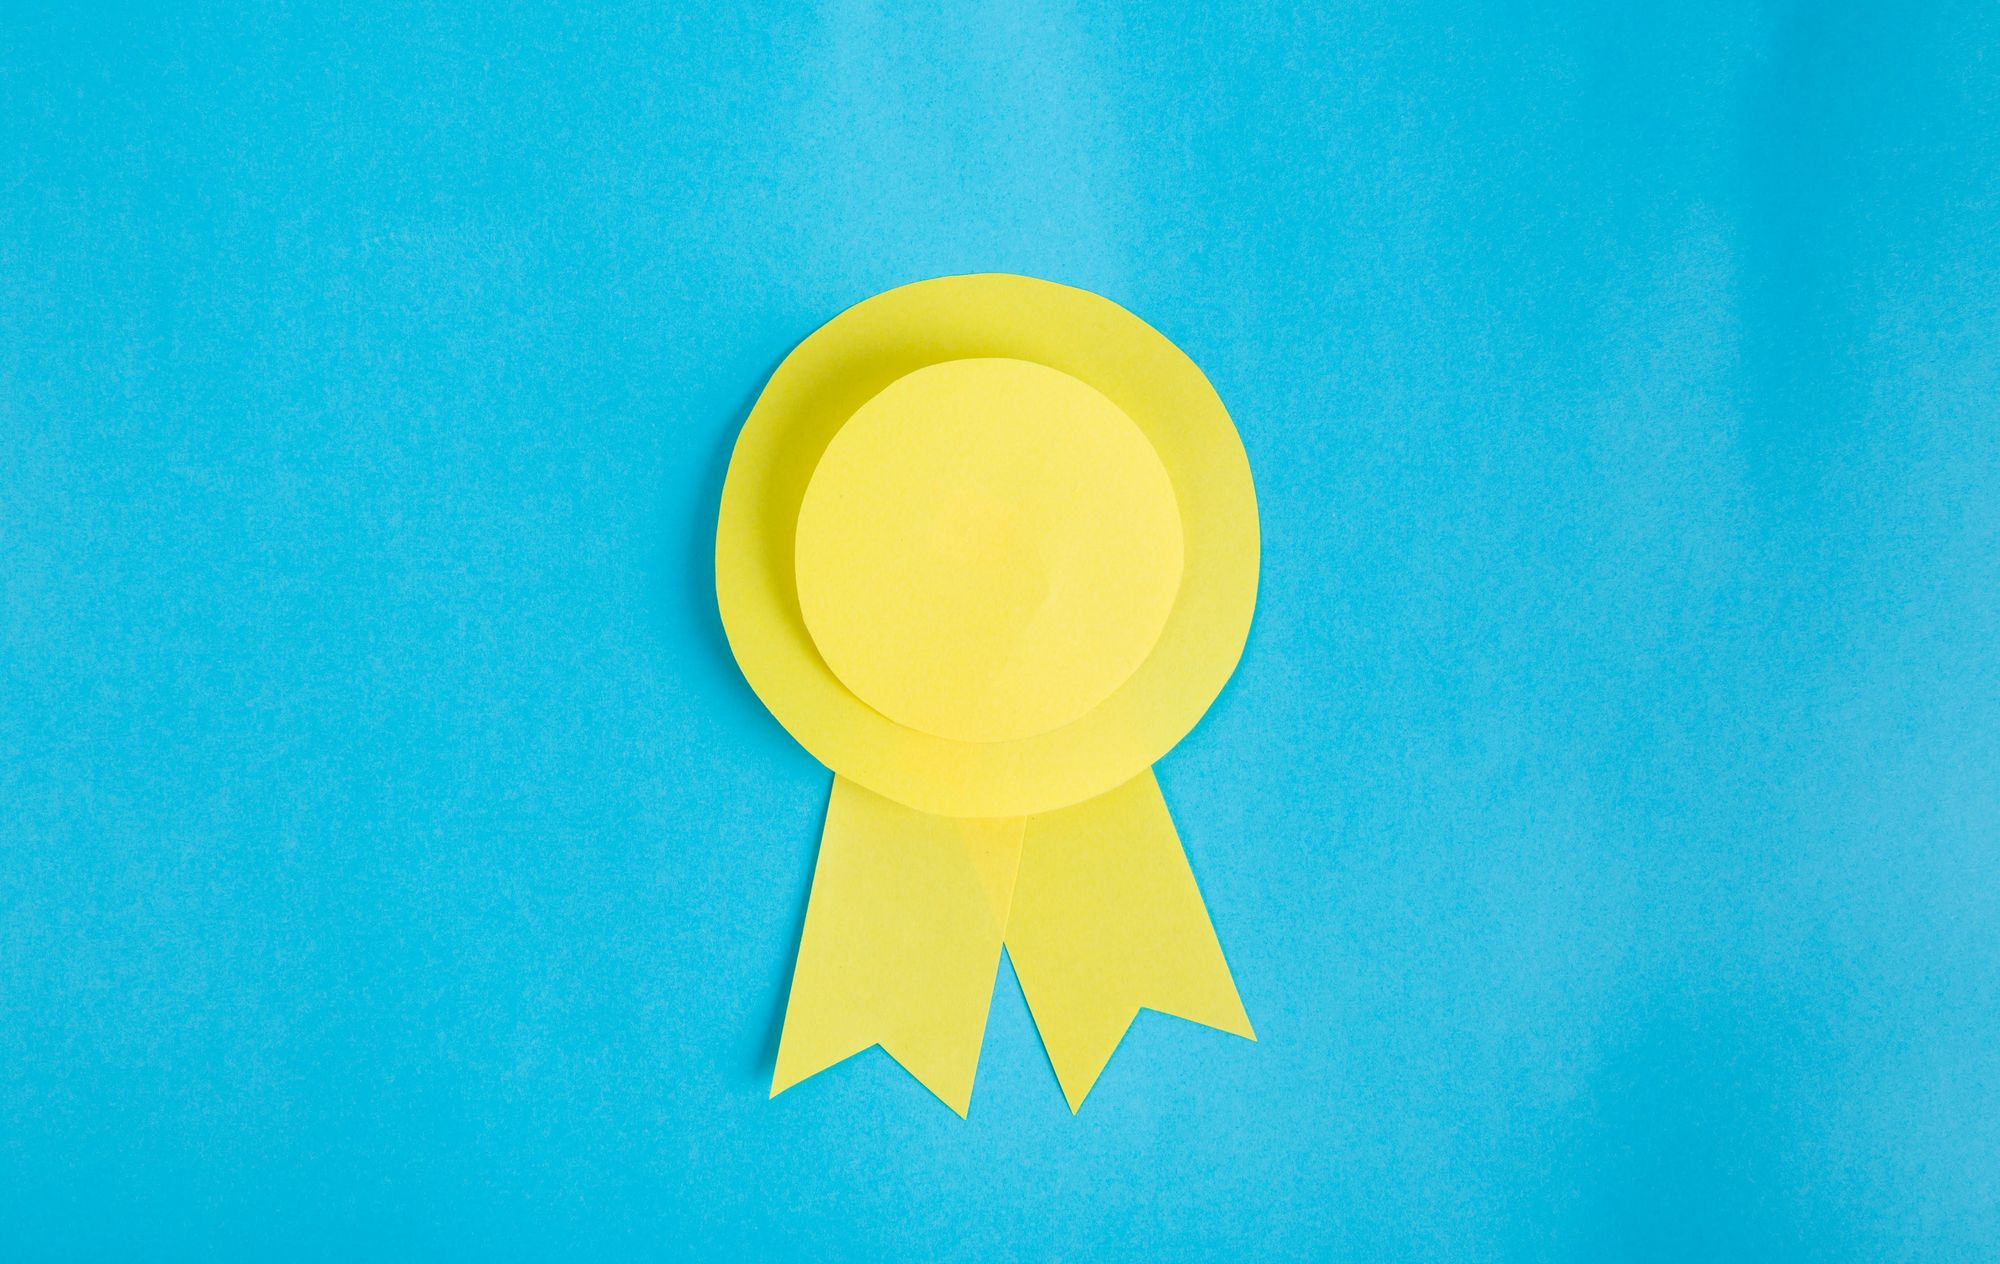 A yellow rosette on a blue background